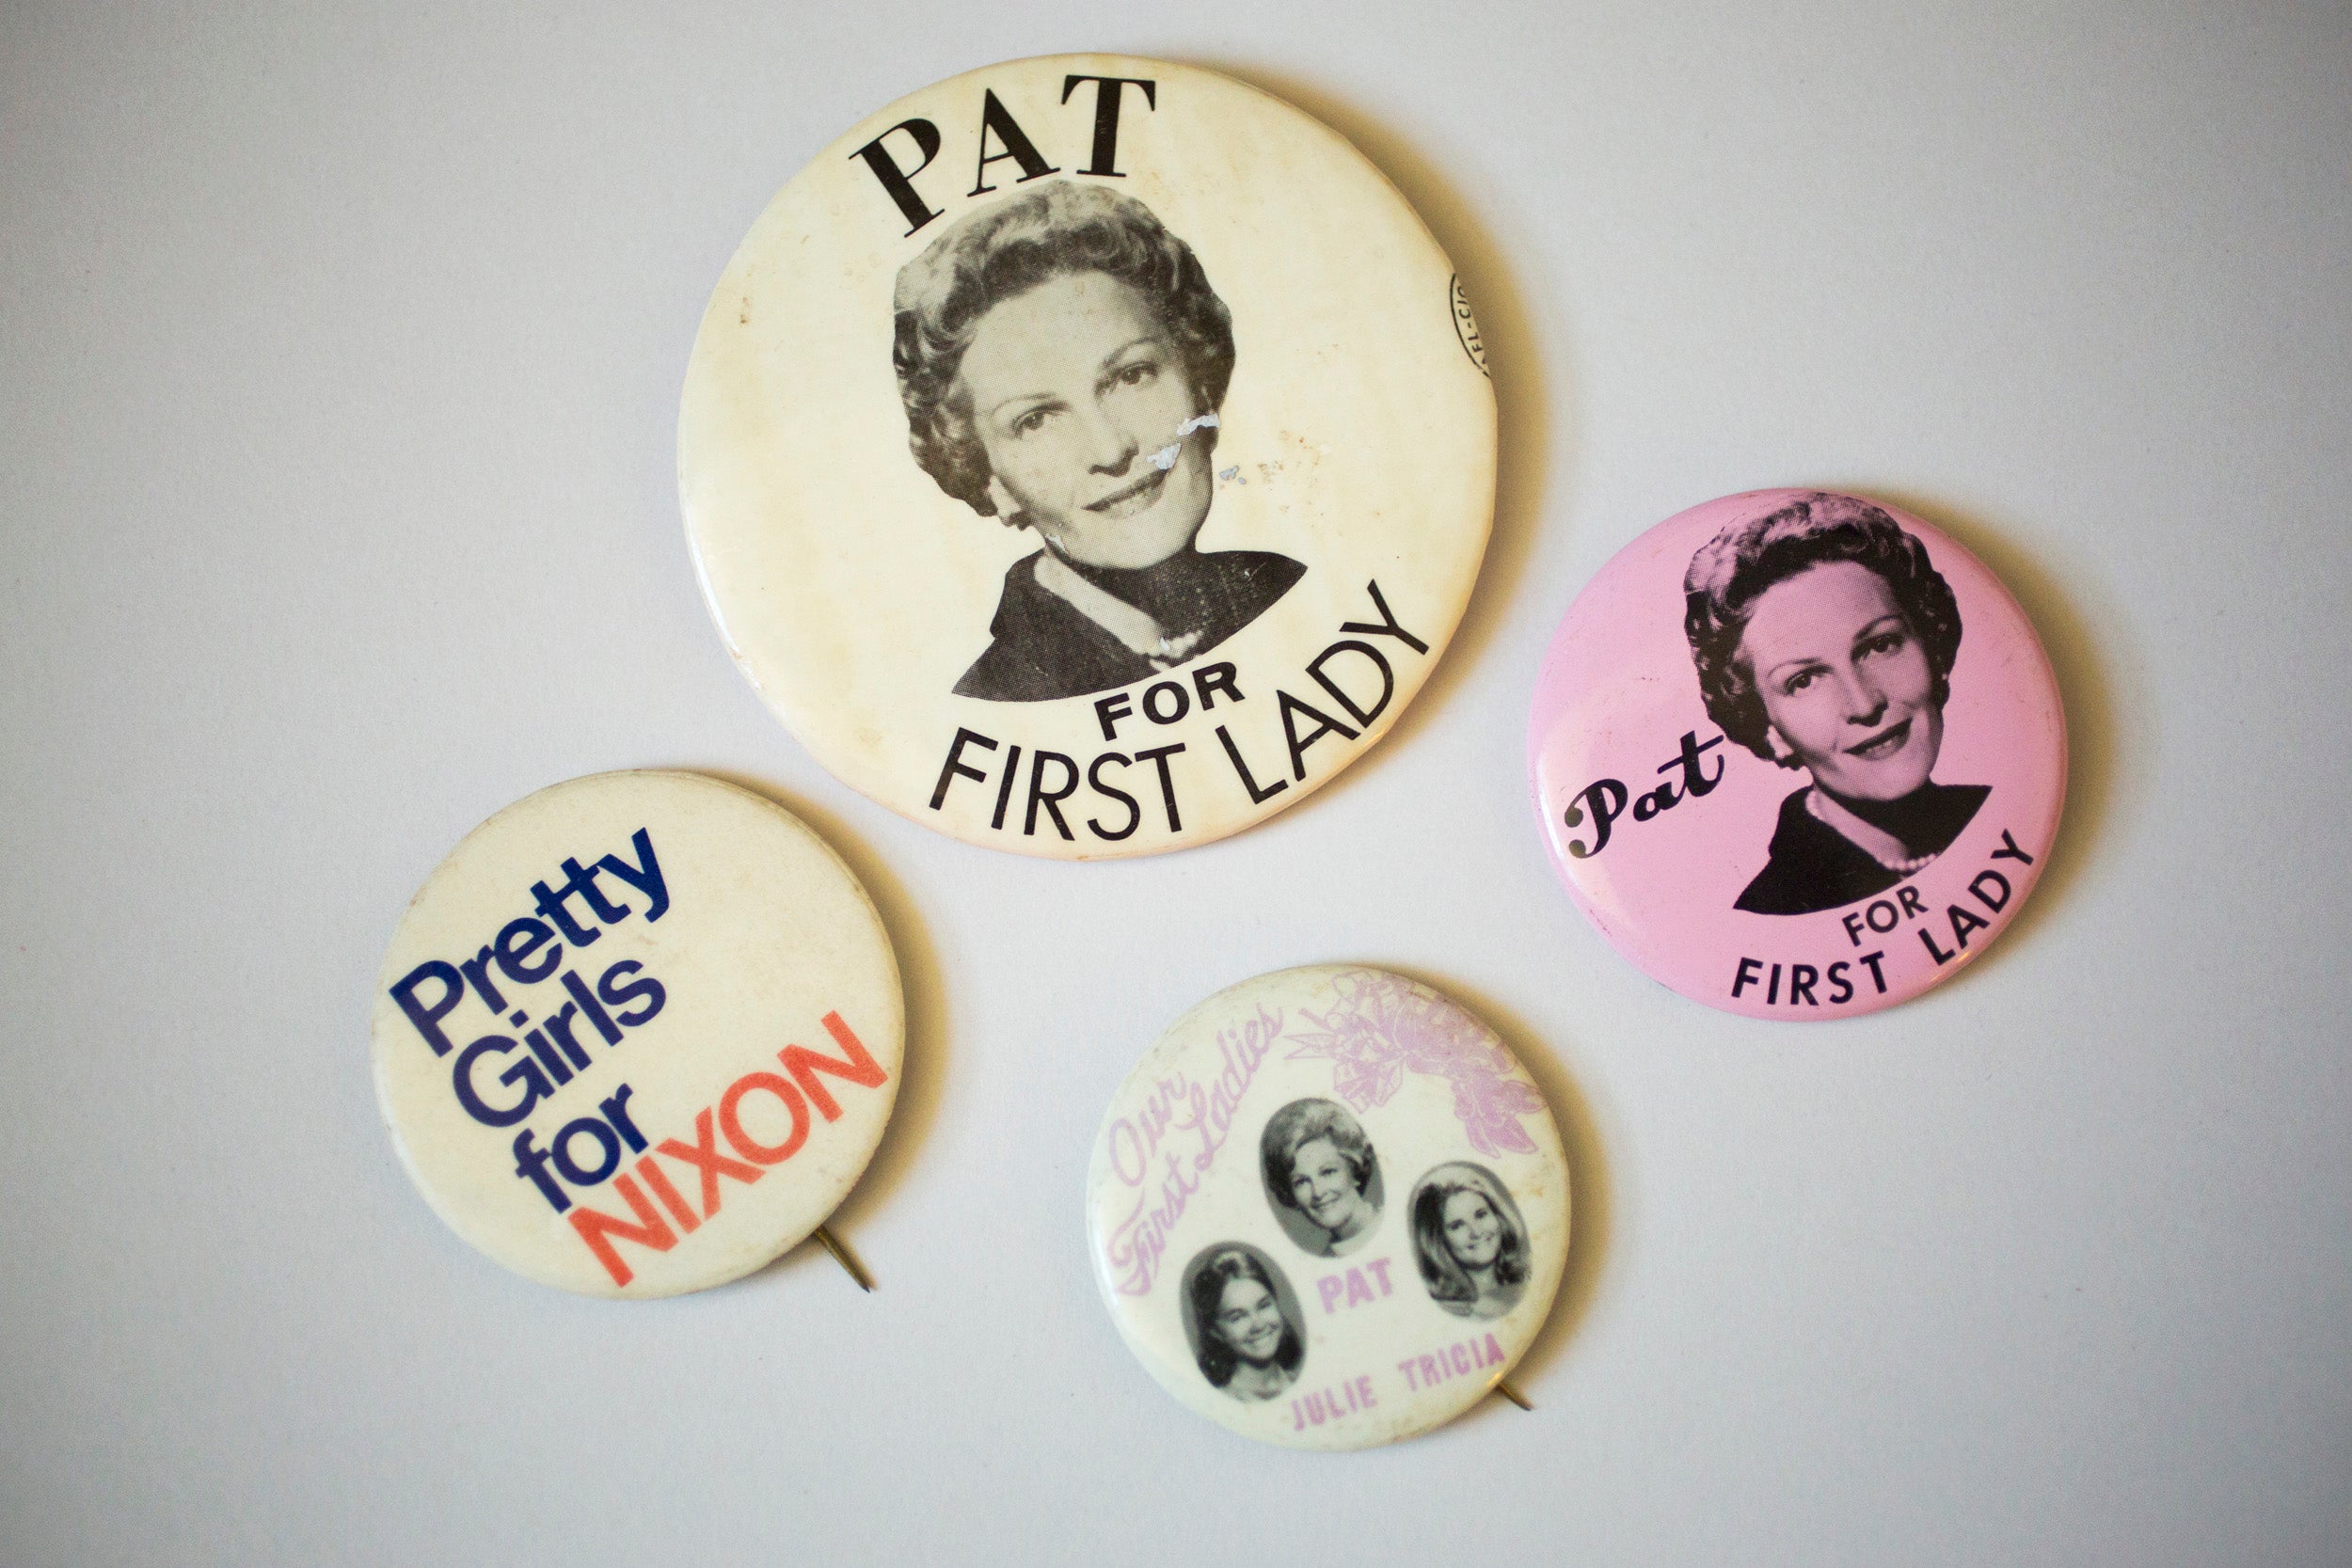 Pat, Julie, and Tricia Nixon had their own supporters and buttons.